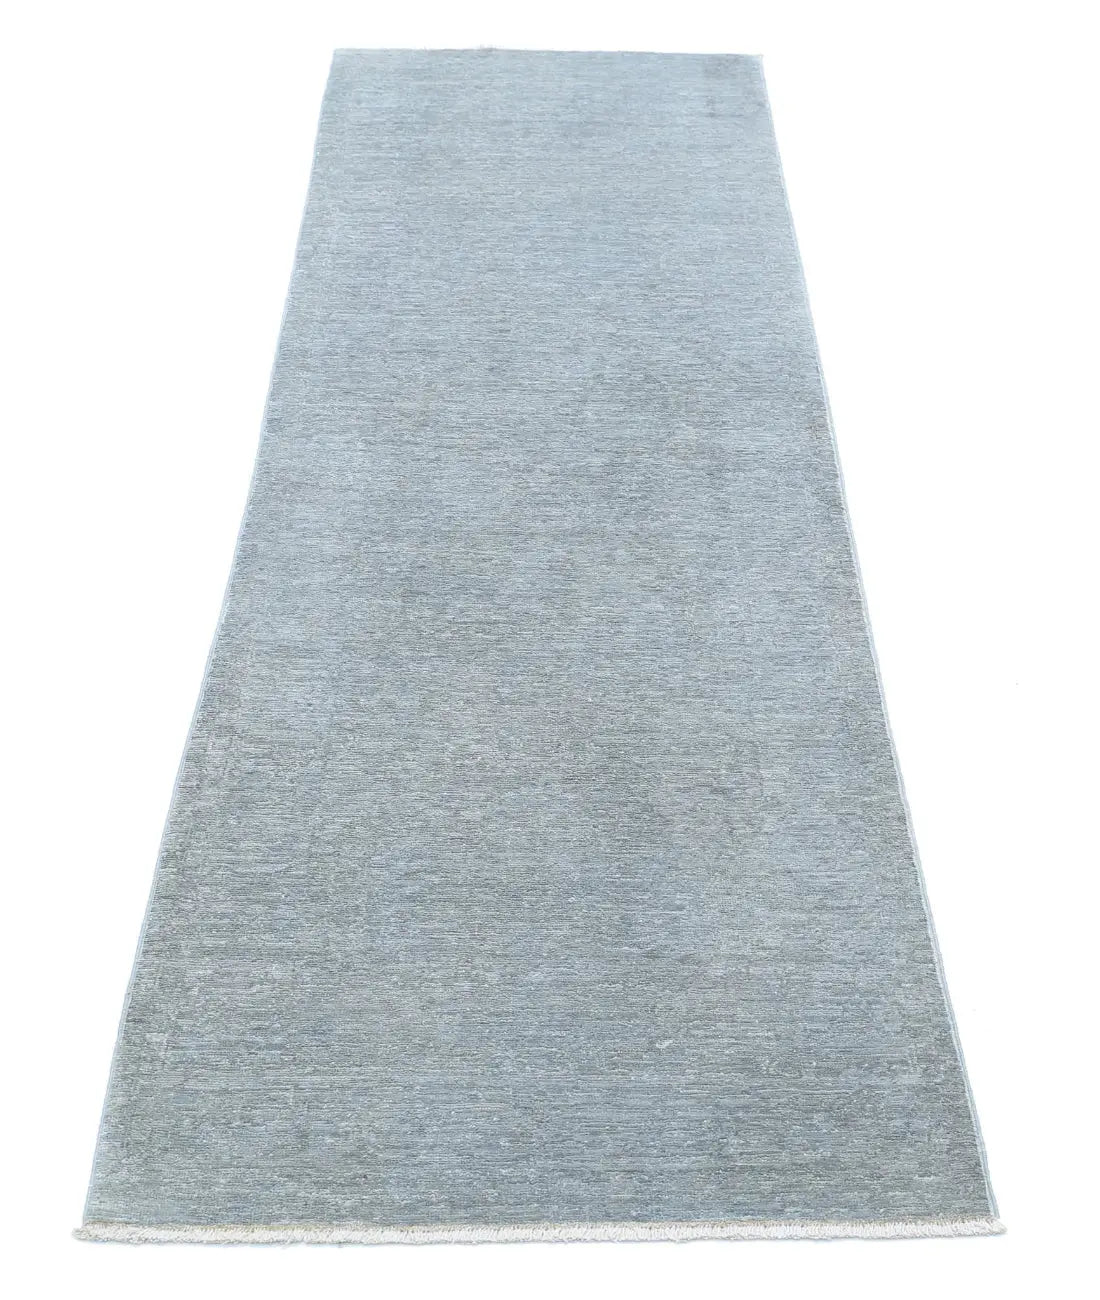 Hand Knotted Overdye Wool Rug - 2'3'' x 8'0''